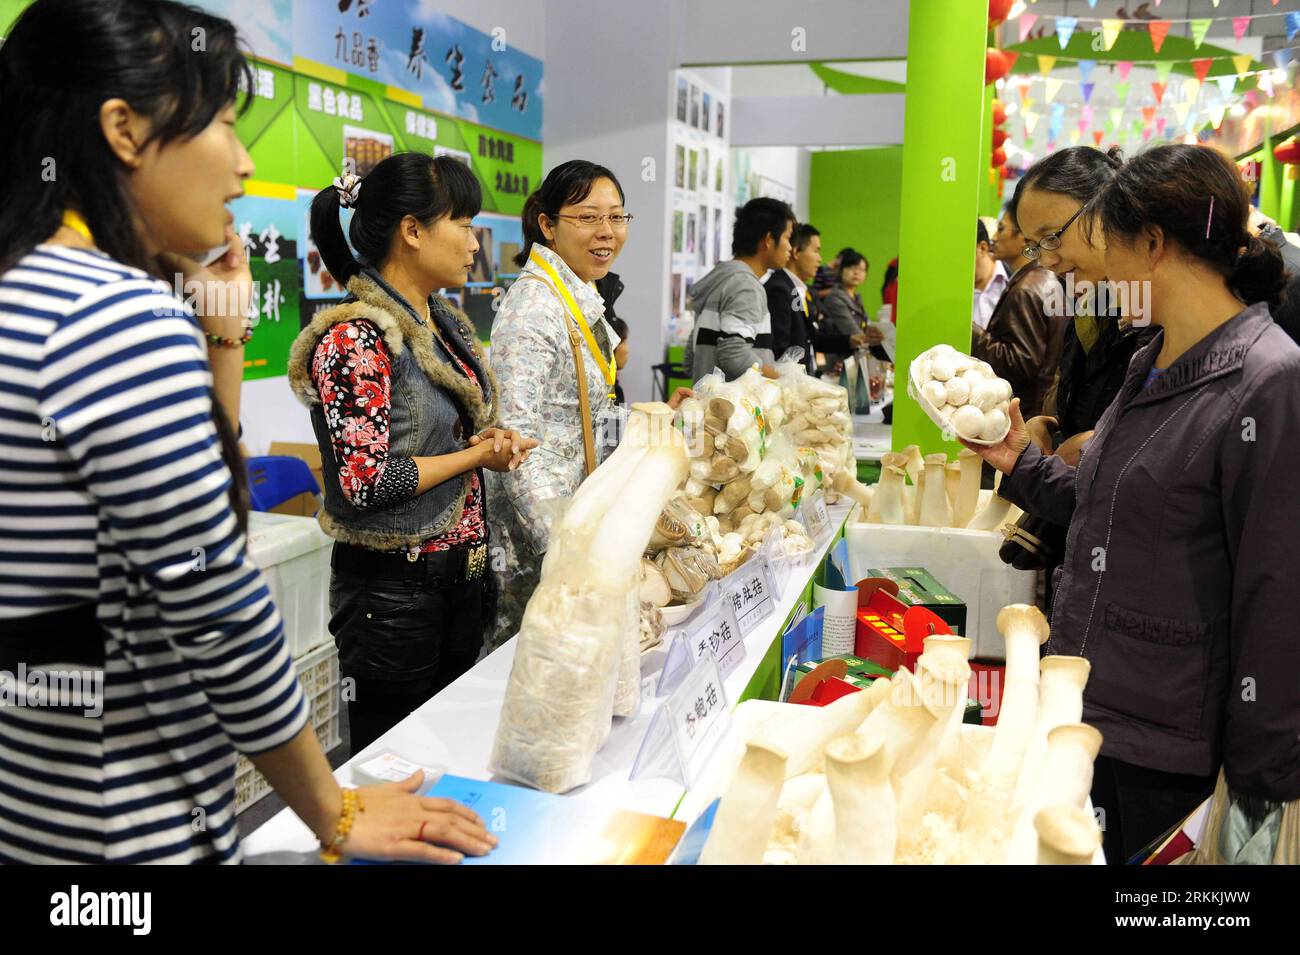 Bildnummer: 56250943  Datum: 05.11.2011  Copyright: imago/Xinhua (111105) -- WUHAN, Nov. 5, 2011 (Xinhua) -- Visitors select mushroom during an agricultural fair in Wuhan, capital of central China s Hubei Province, Nov. 5, 2011. More than 17,000 agricultural produces from 2,300 exhibitors around the world took part in the four-day fair starting on Saturday. (Xinhua/Hao Tongqian) (ry) CHINA-WUHAN-AGRICULTURE-FAIR (CN) PUBLICATIONxNOTxINxCHN Wirtschaft Messe Landwirtschaft Landwirtschaftsmesse xbs x0x 2011 quer      56250943 Date 05 11 2011 Copyright Imago XINHUA  Wuhan Nov 5 2011 XINHUA Visitor Stock Photo